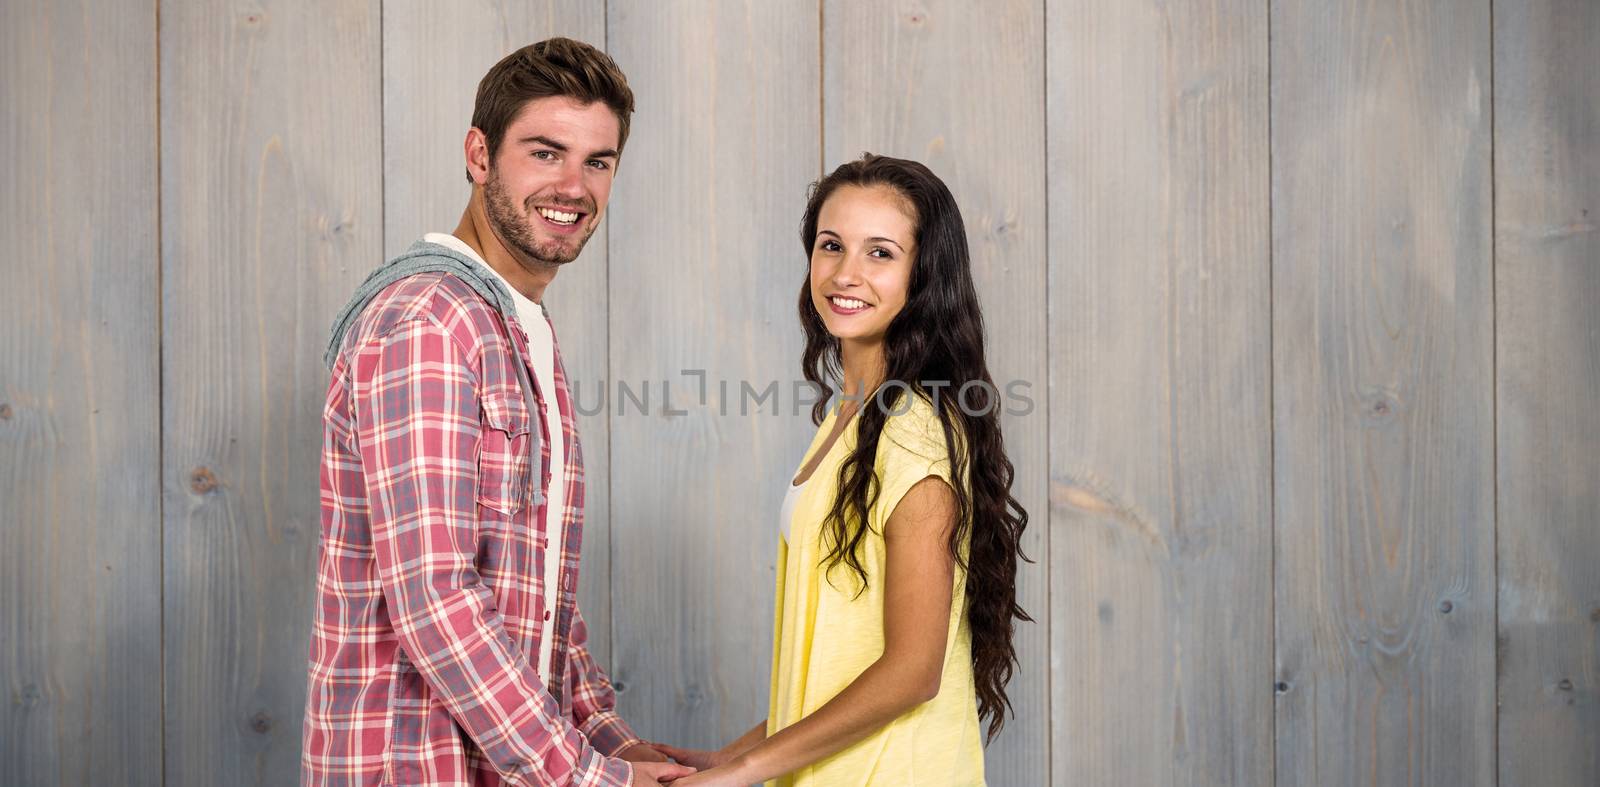 Smiling couple holding their hands and looking at camera against pale grey wooden planks